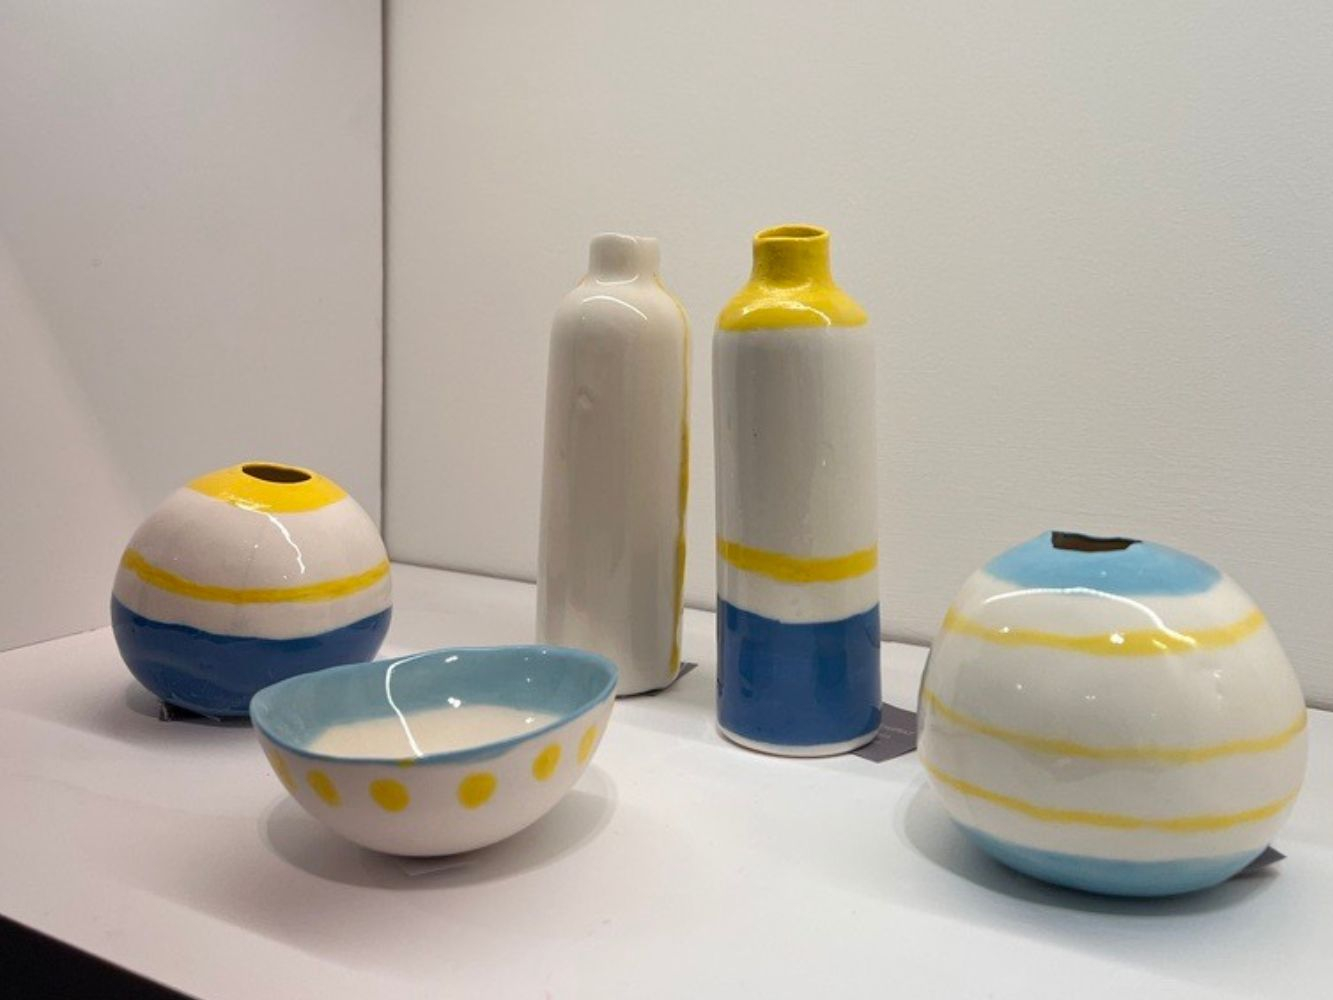 A display of yellow, blue and white coloured bowls and vases